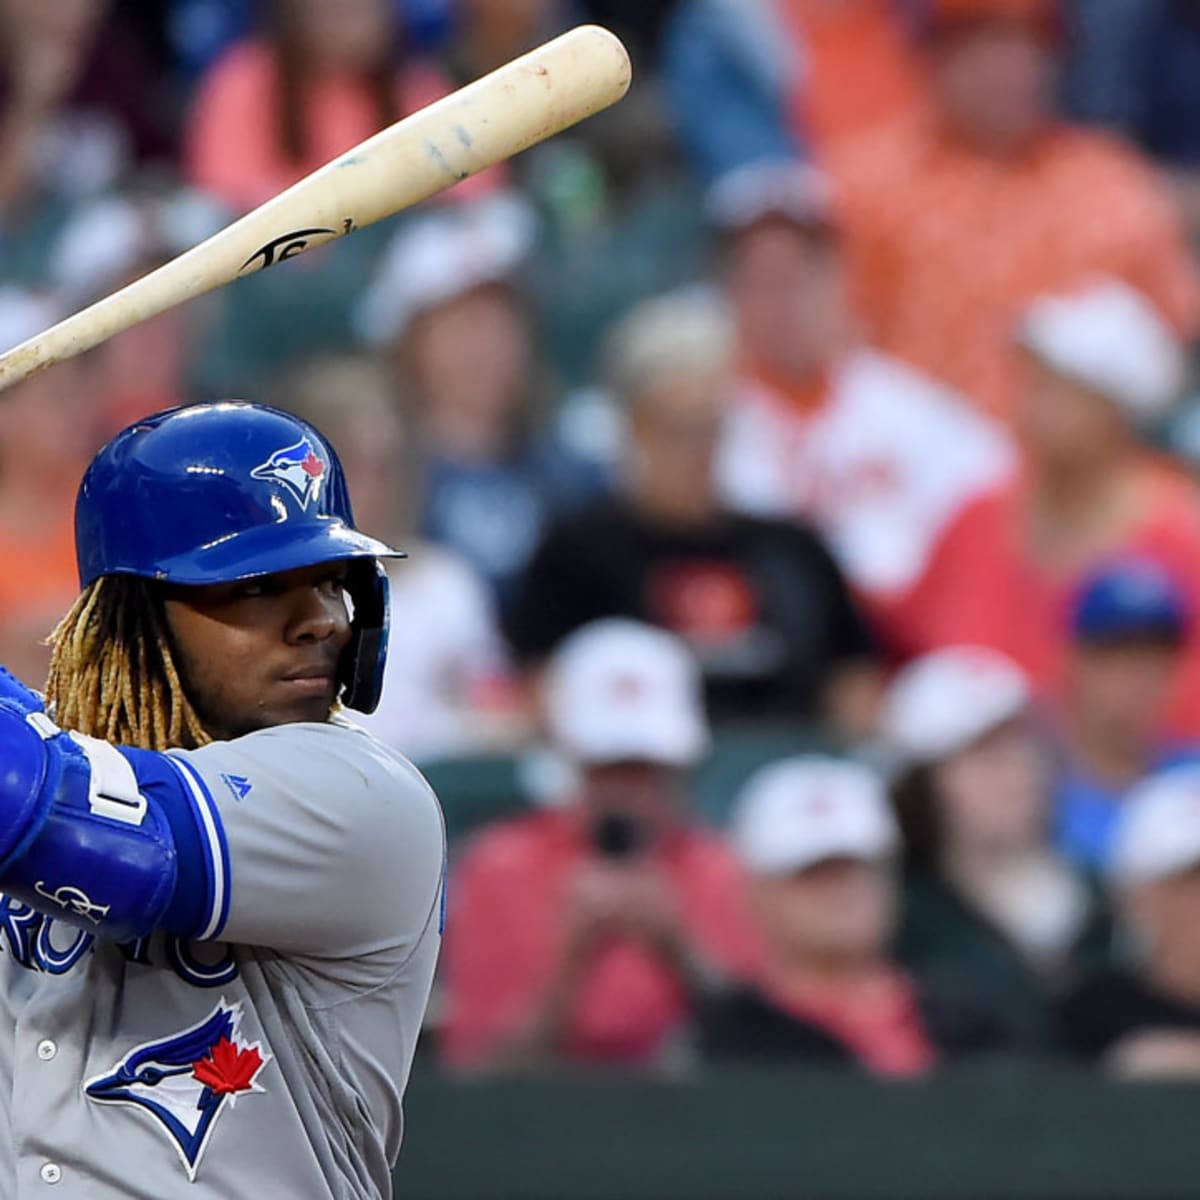 Vlad Guerrero Jr. follows in his father's footsteps to become the